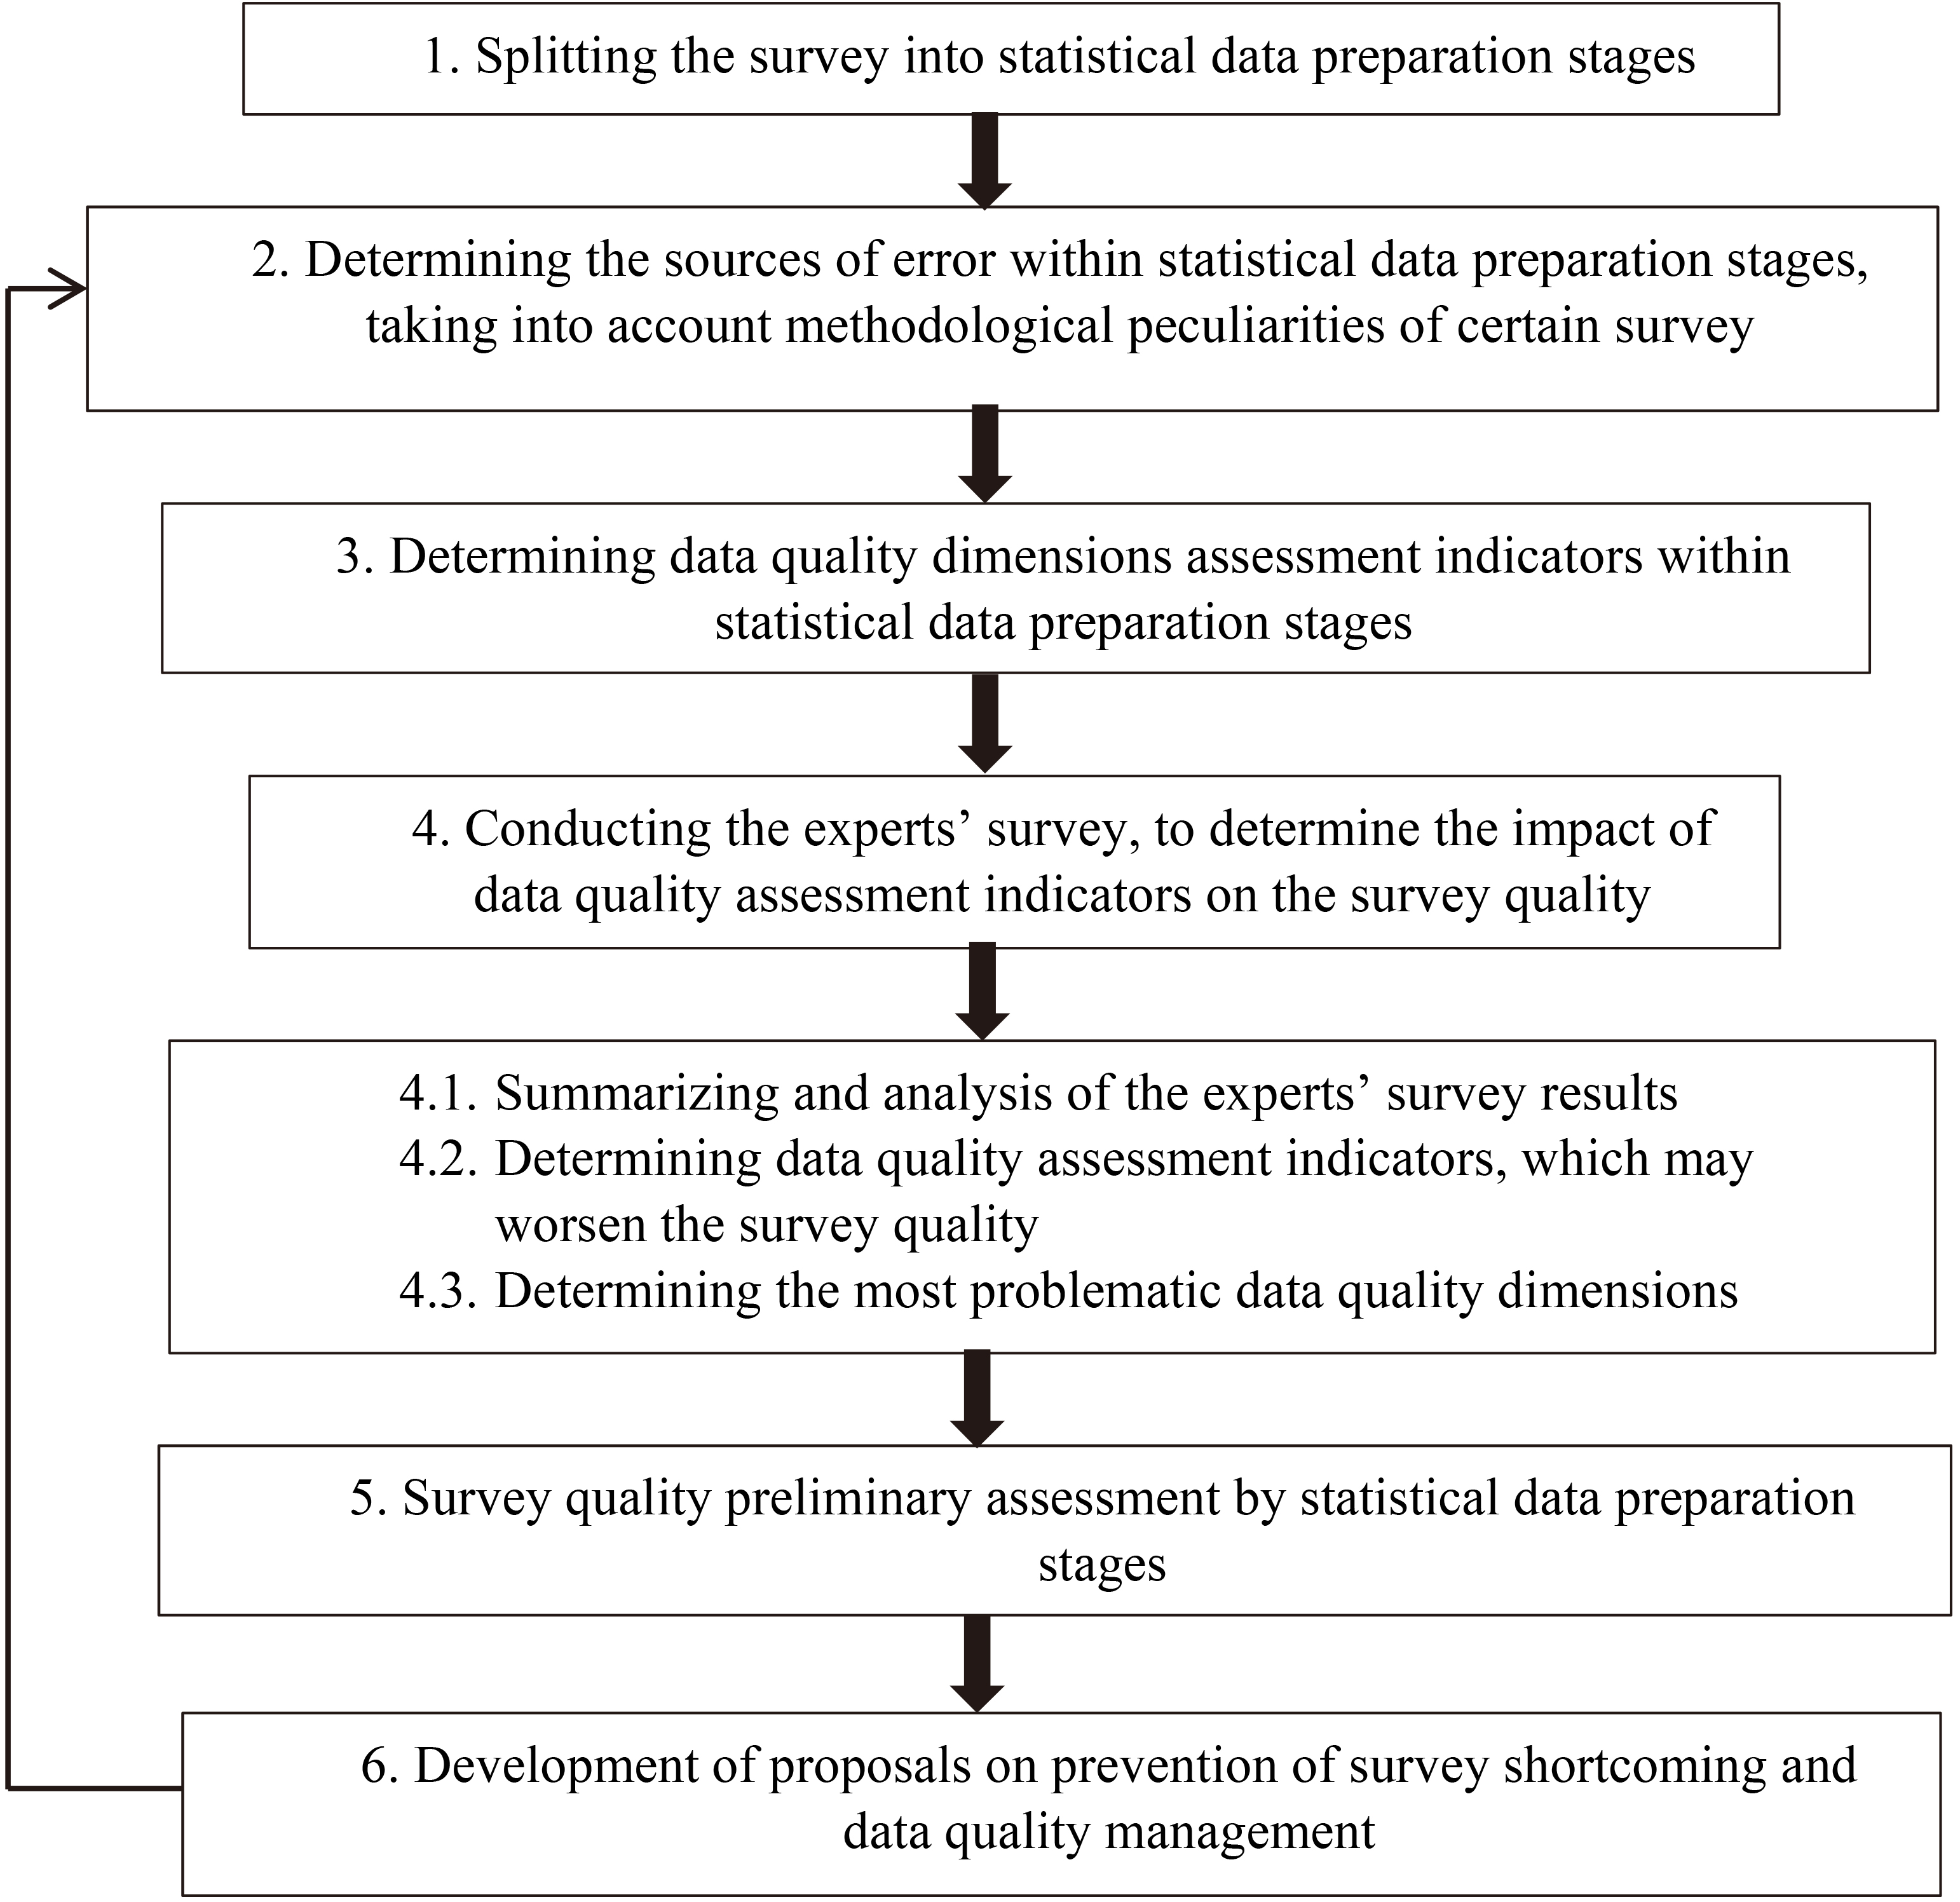 Survey quality assessment methodology. Source: prepared by author.